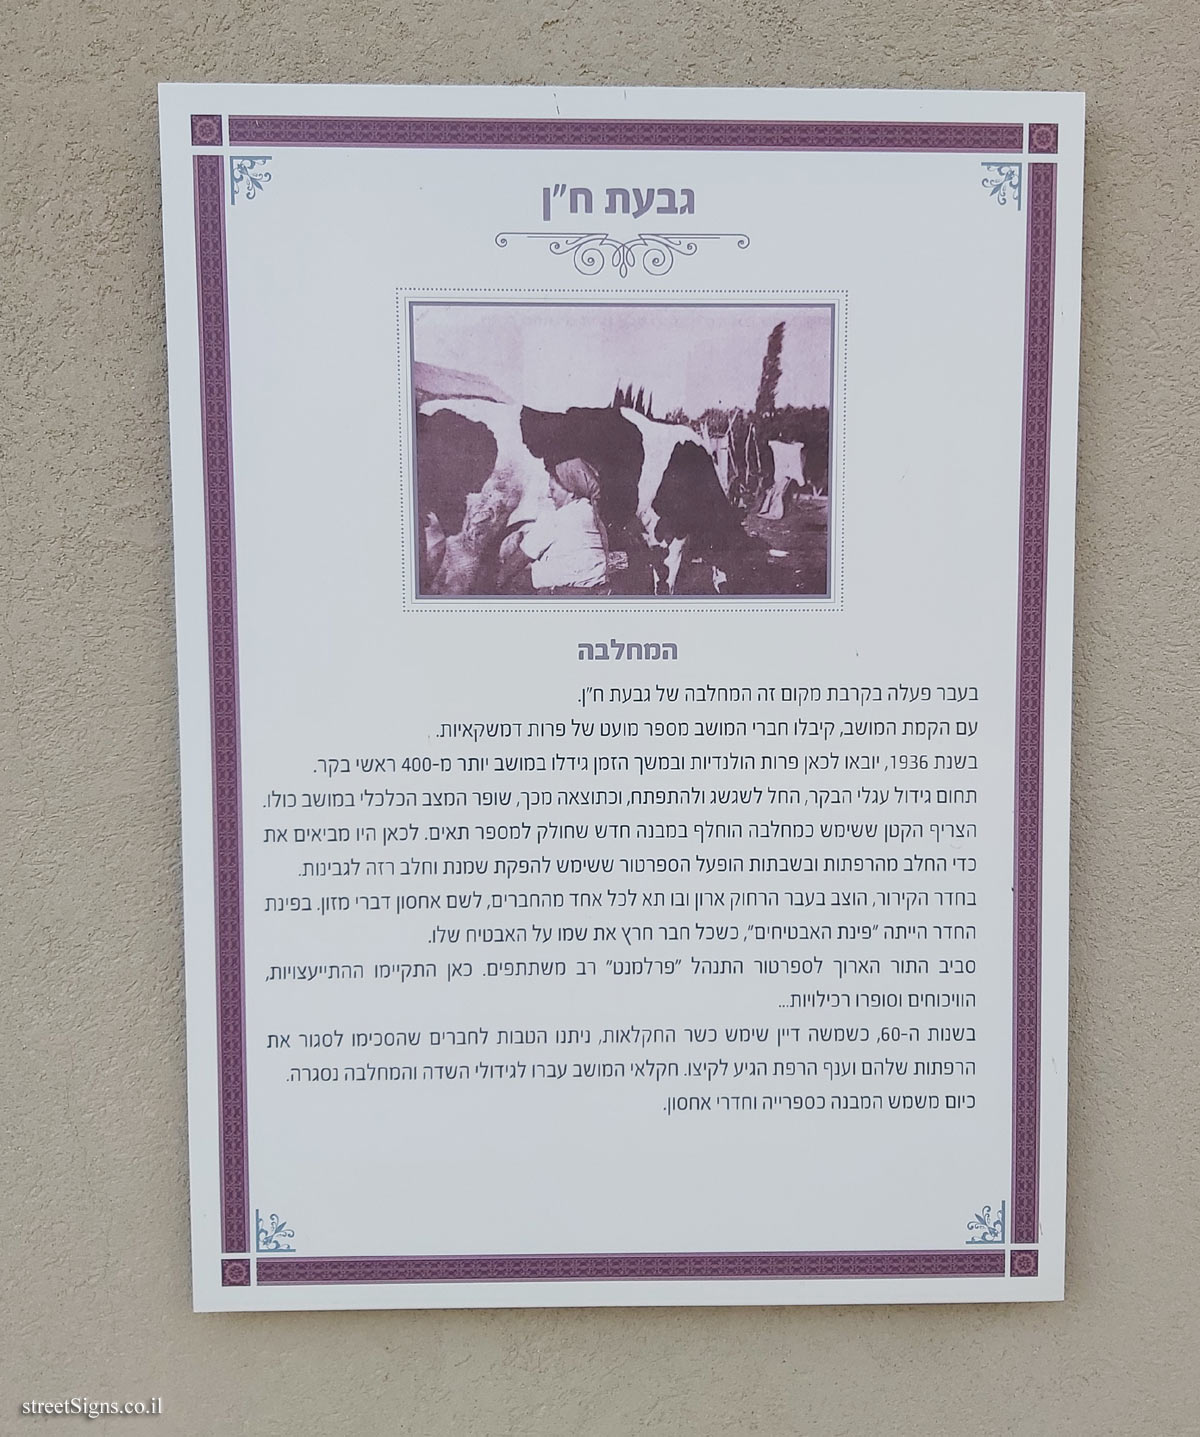 Givat Hen - The dairy